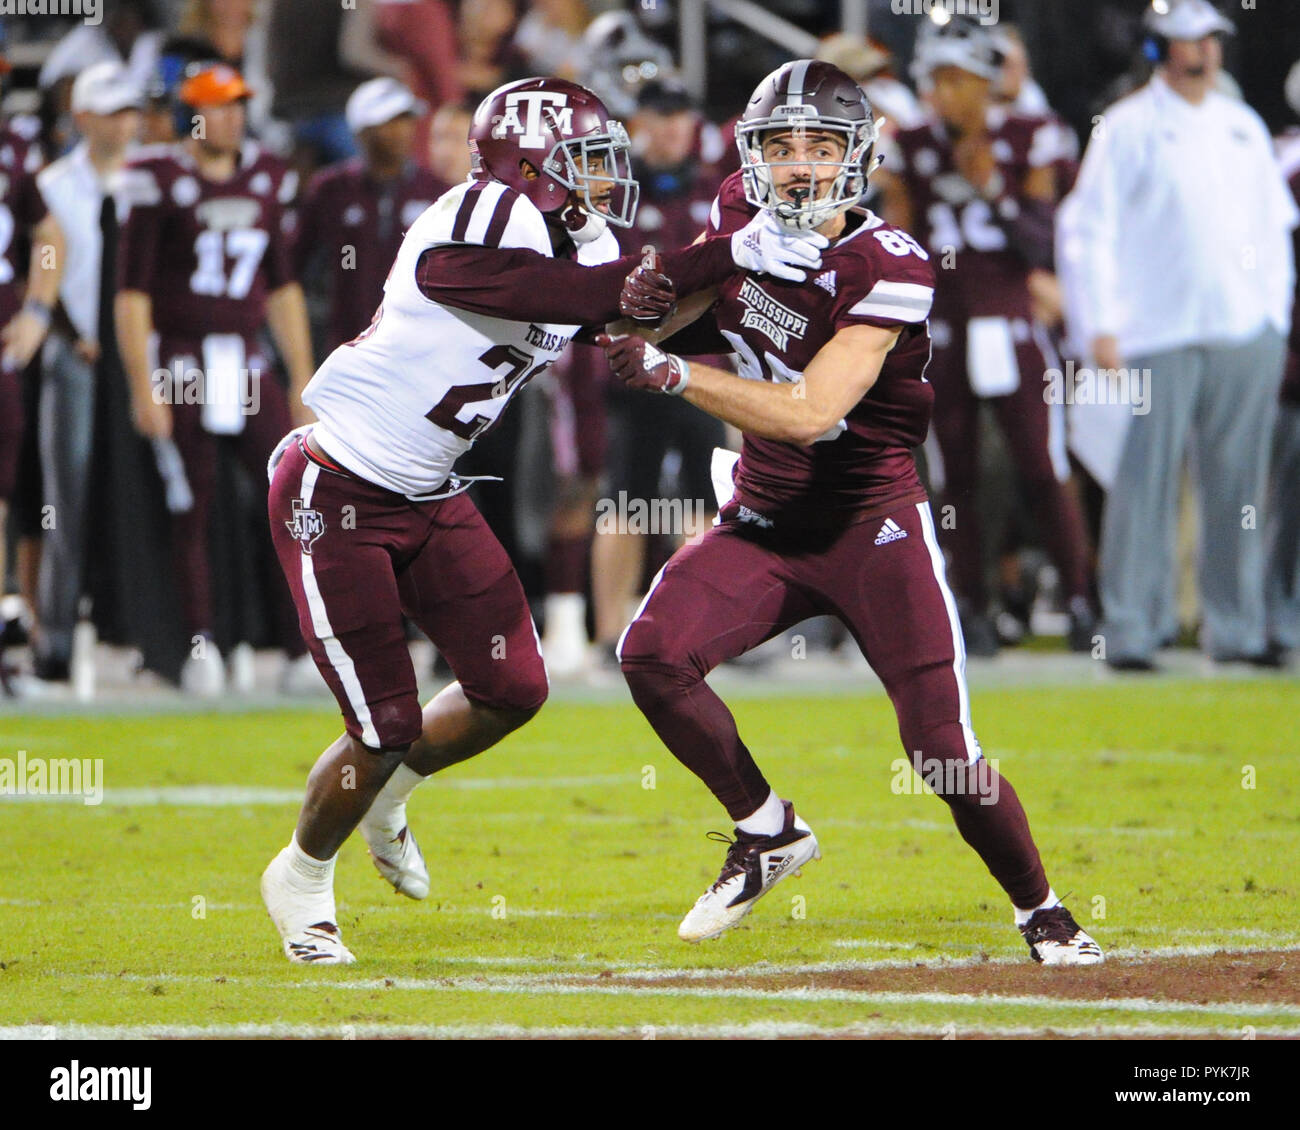 https://c8.alamy.com/comp/PYK7JR/starkville-ms-usa-27th-oct-2018-mississippi-state-wide-receiver-austin-williams-85-is-covered-by-texas-a-m-defensive-back-deshaen-capers-smith-26-during-the-ncaa-football-game-between-texas-am-and-the-mississippi-state-bulldogs-at-davis-wade-stadium-in-starkville-ms-mississippi-state-defeated-texas-am-28-13-kevin-langleycsmalamy-live-news-PYK7JR.jpg